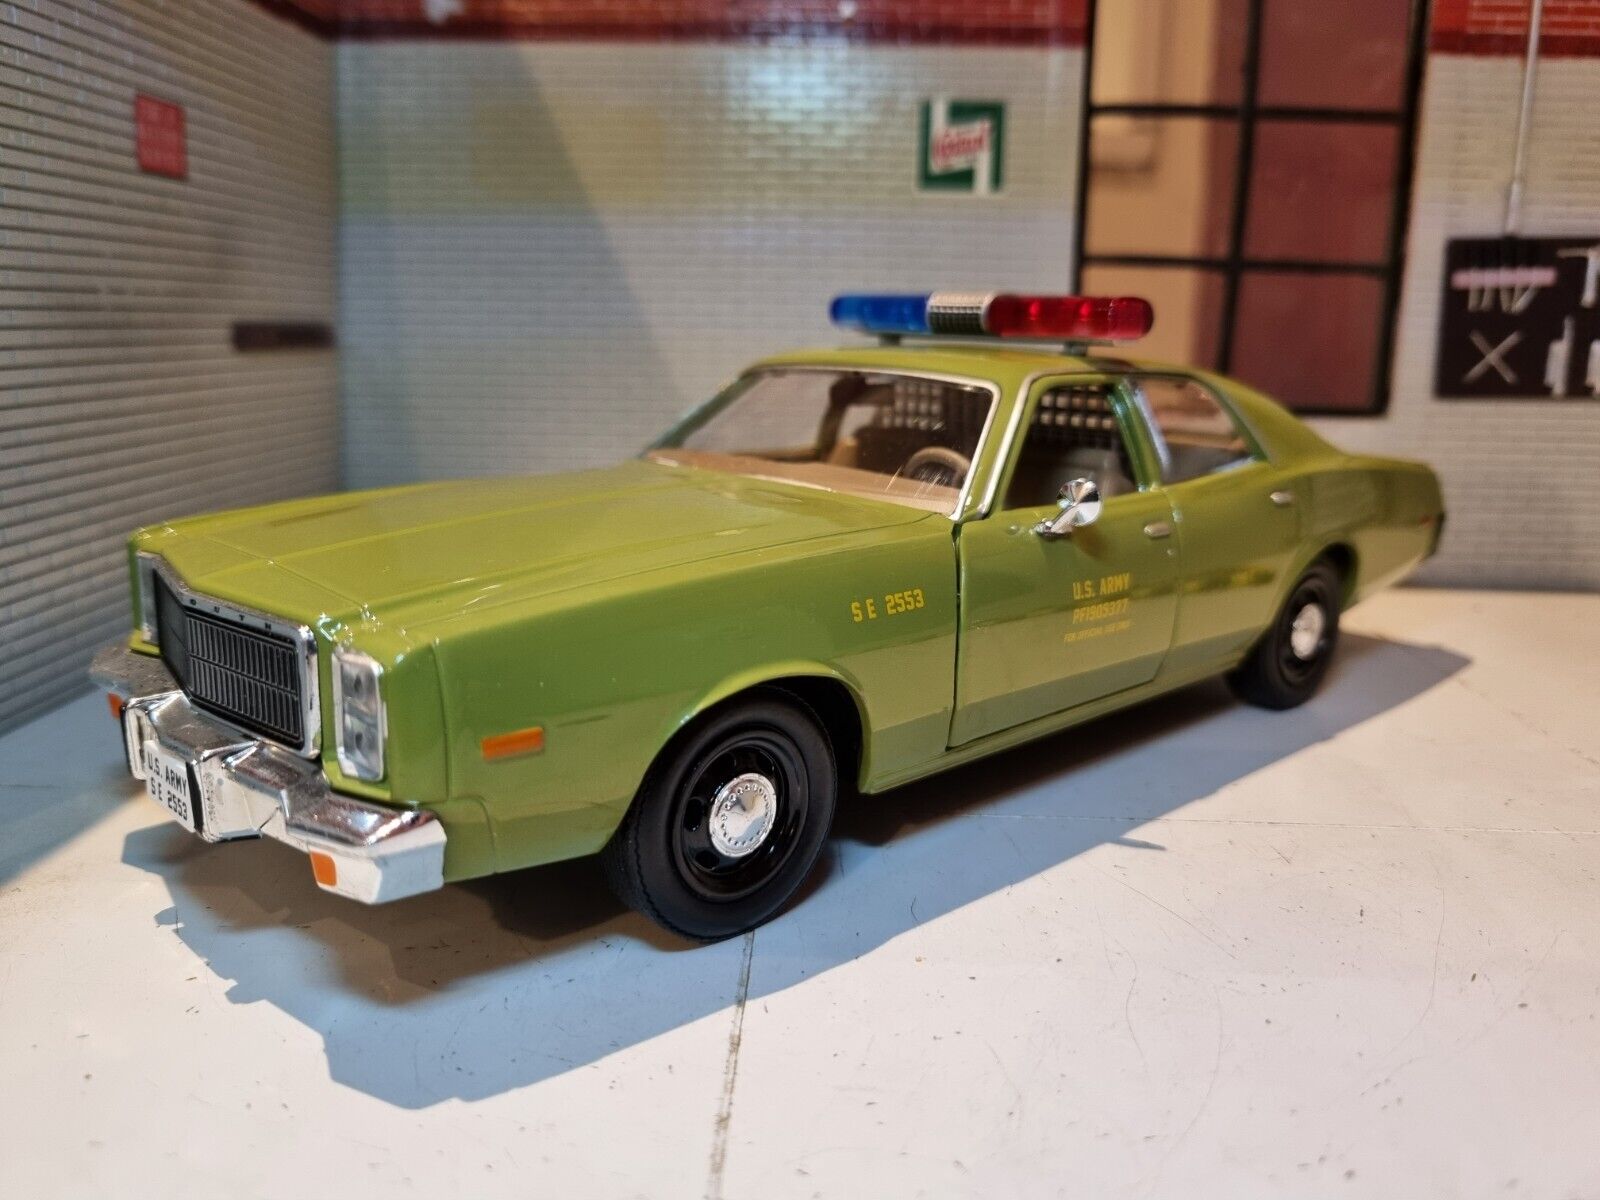 3/4 View (facing left) of A 1:24 Scale Green Plymouth Fury